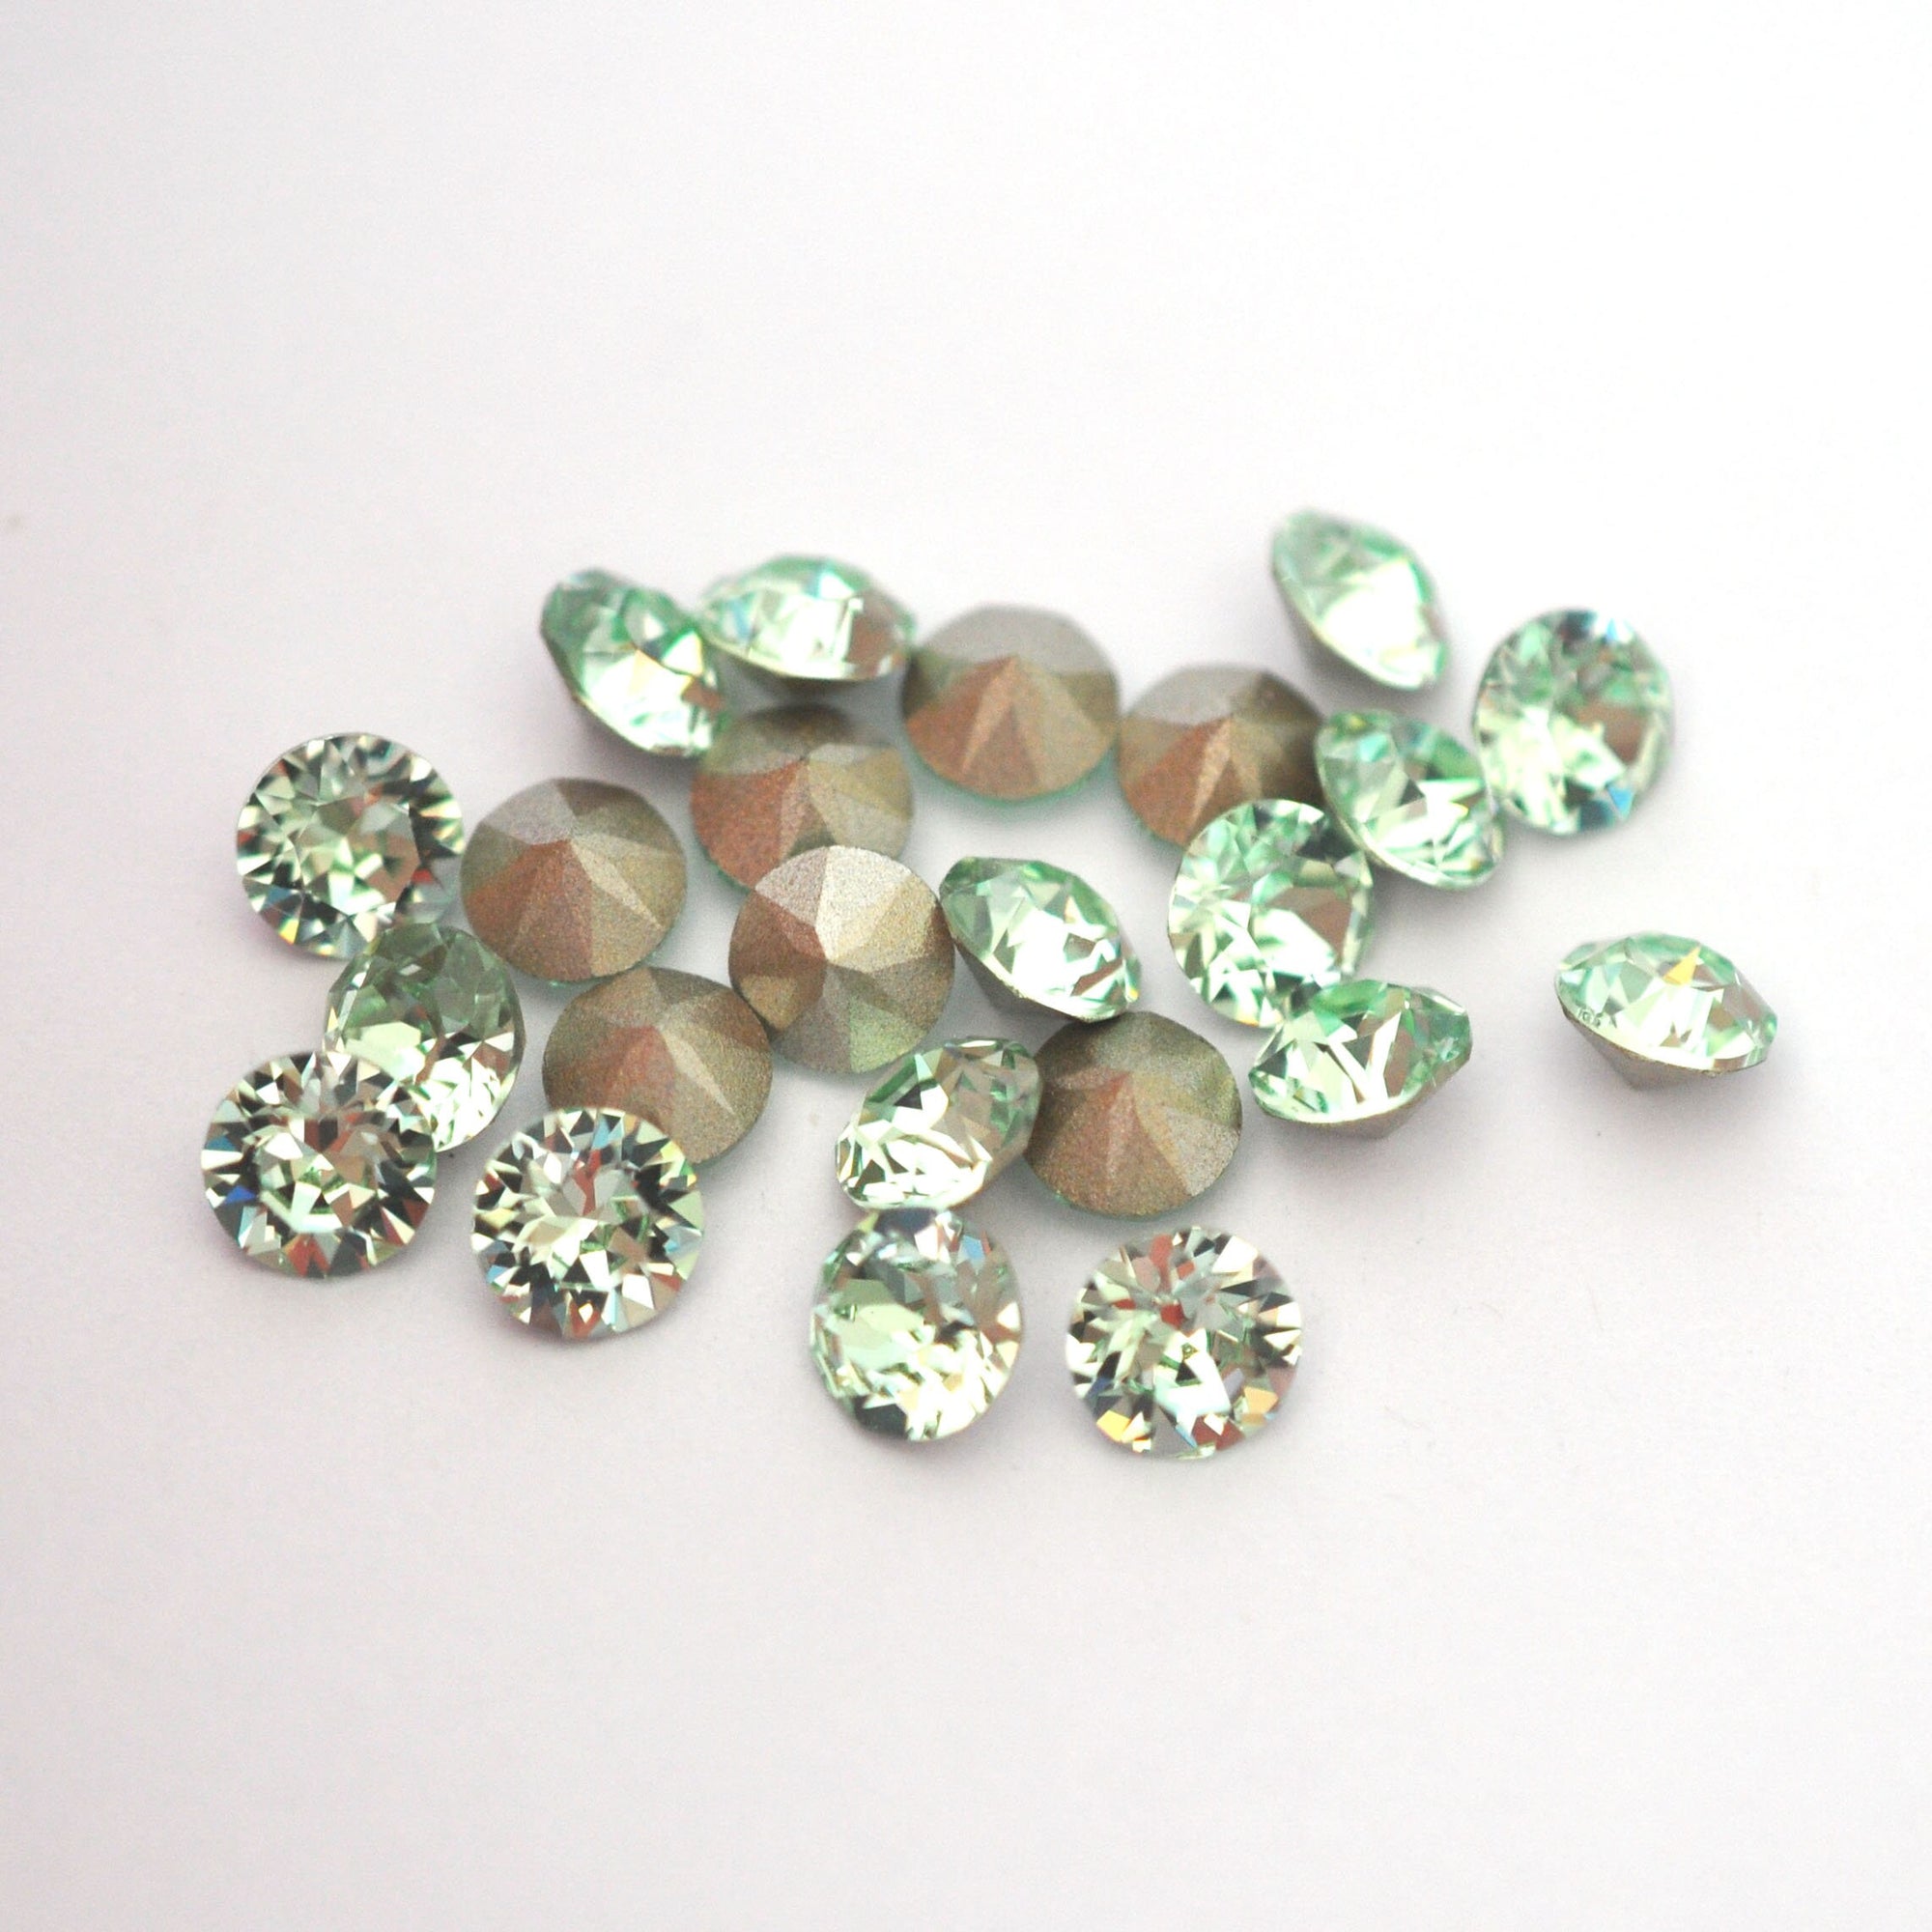 Chrysolite 1088 Pointed Back Chaton Barton Crystal 29ss, 6mm